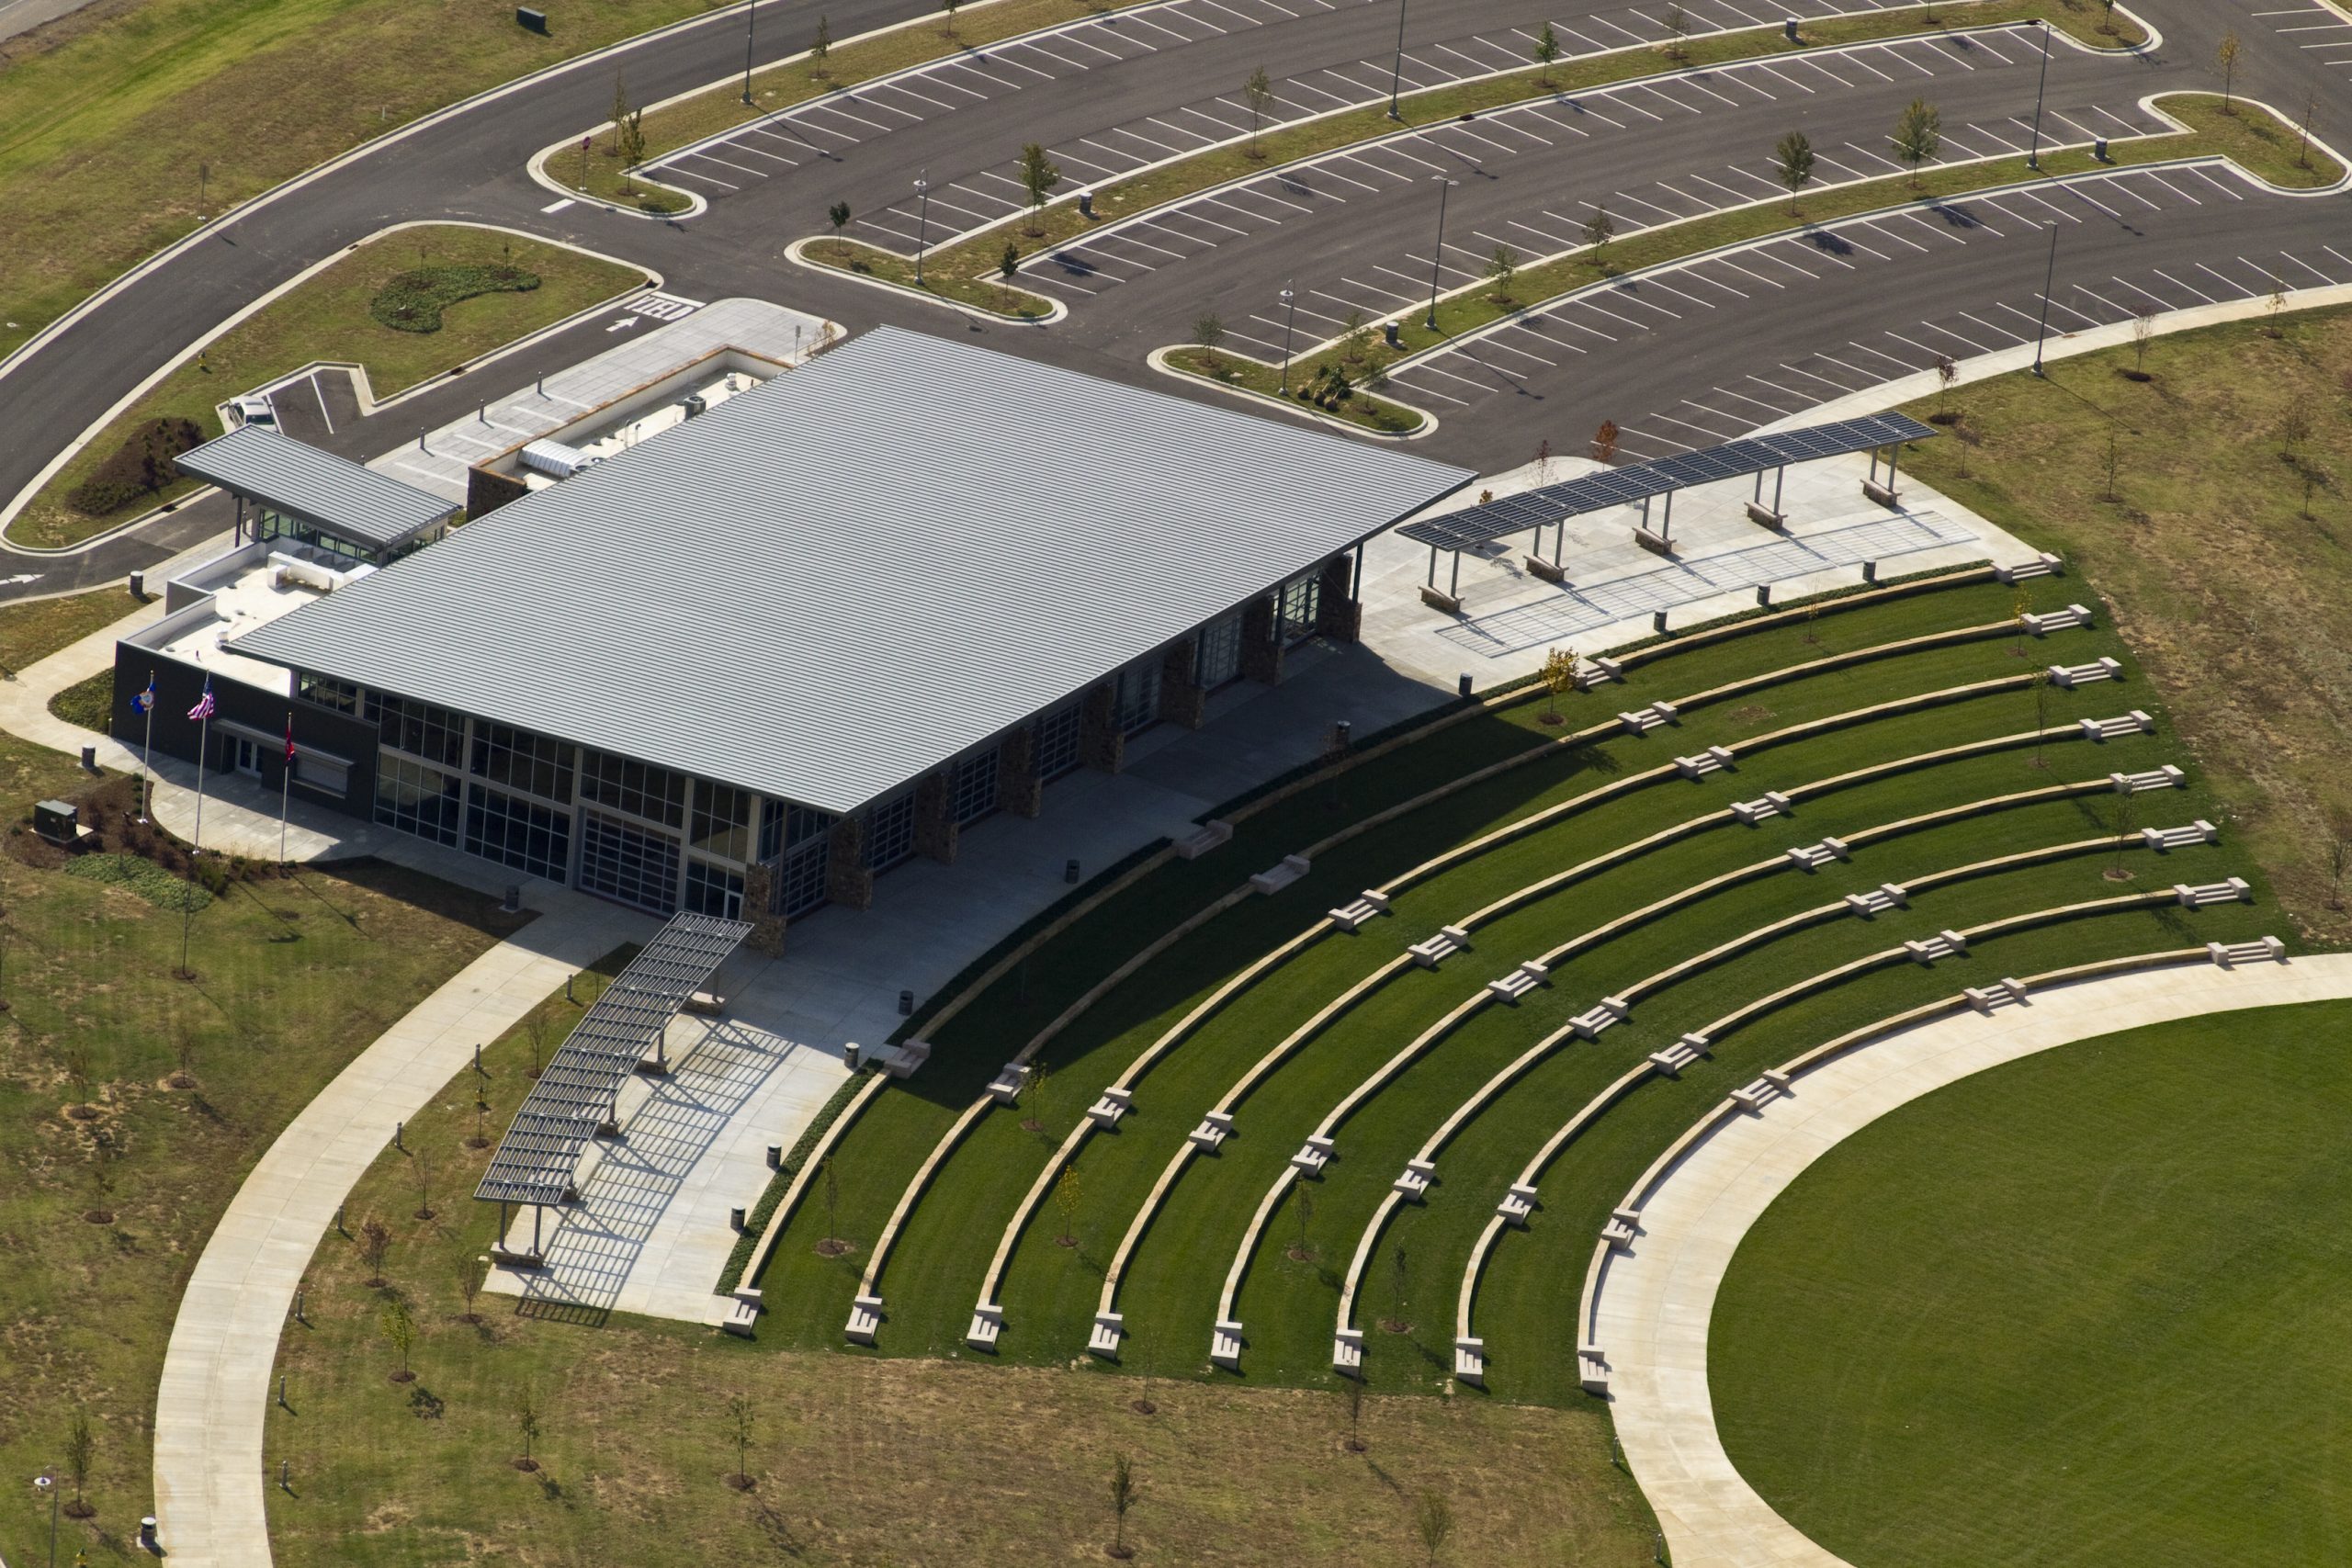 South Liberty Park & Wilma Rudolph Events Center